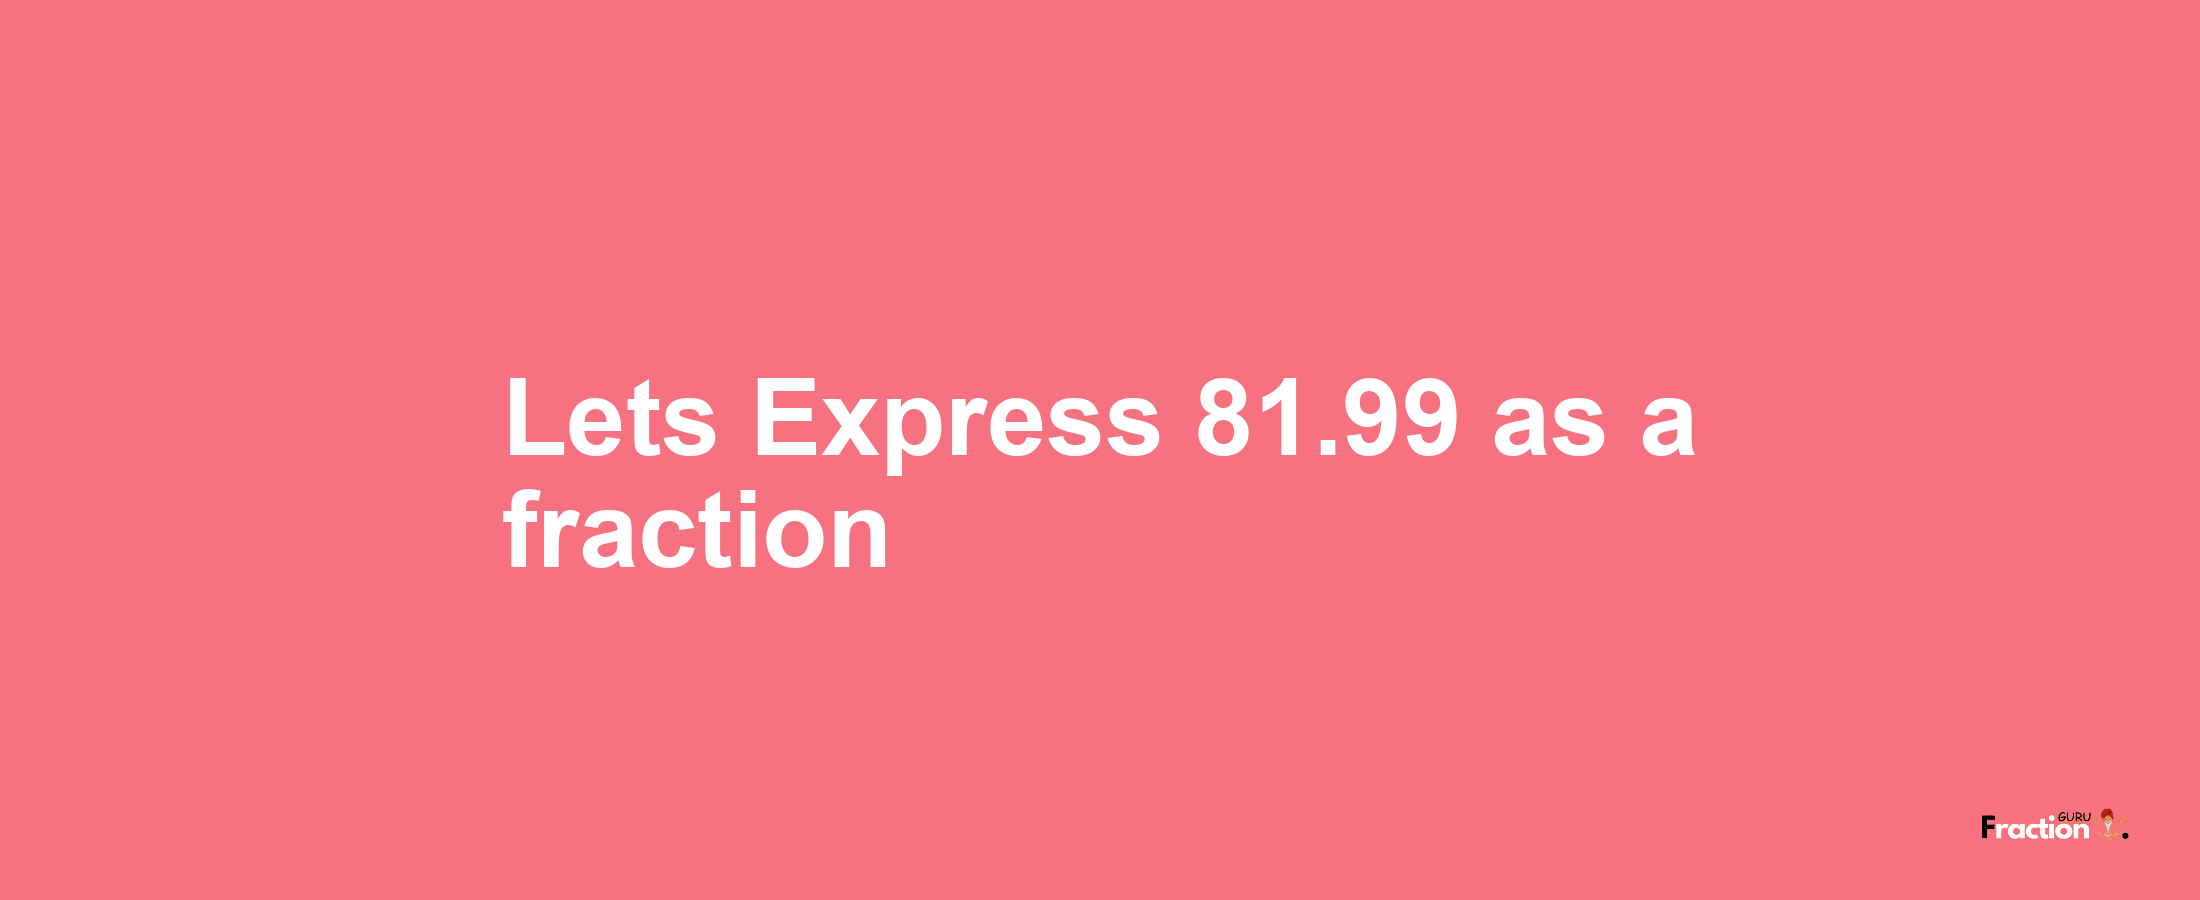 Lets Express 81.99 as afraction